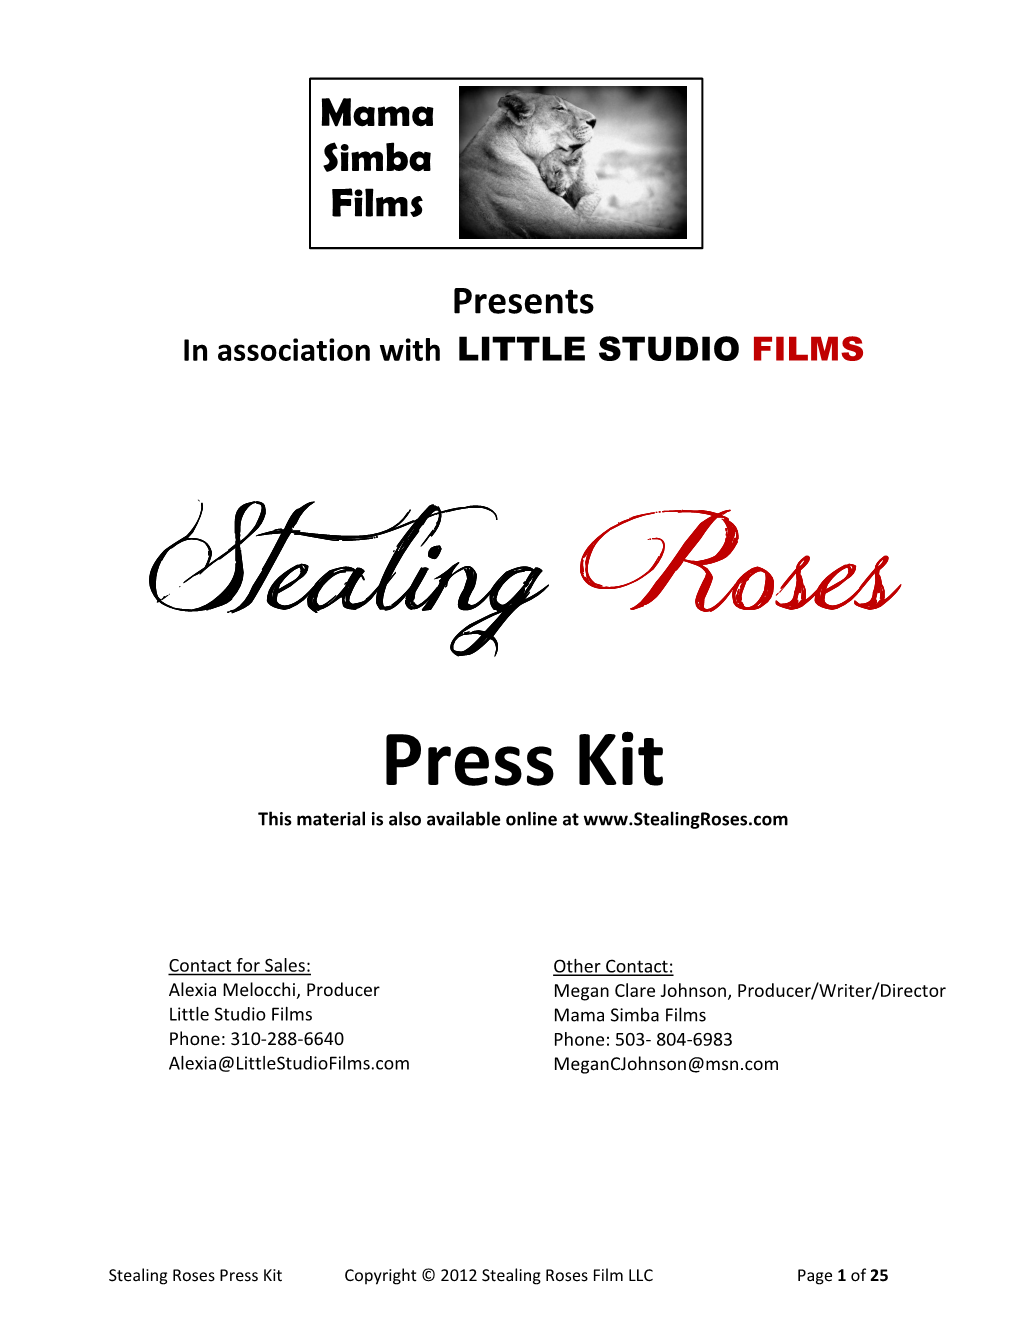 Press Kit This Material Is Also Available Online At